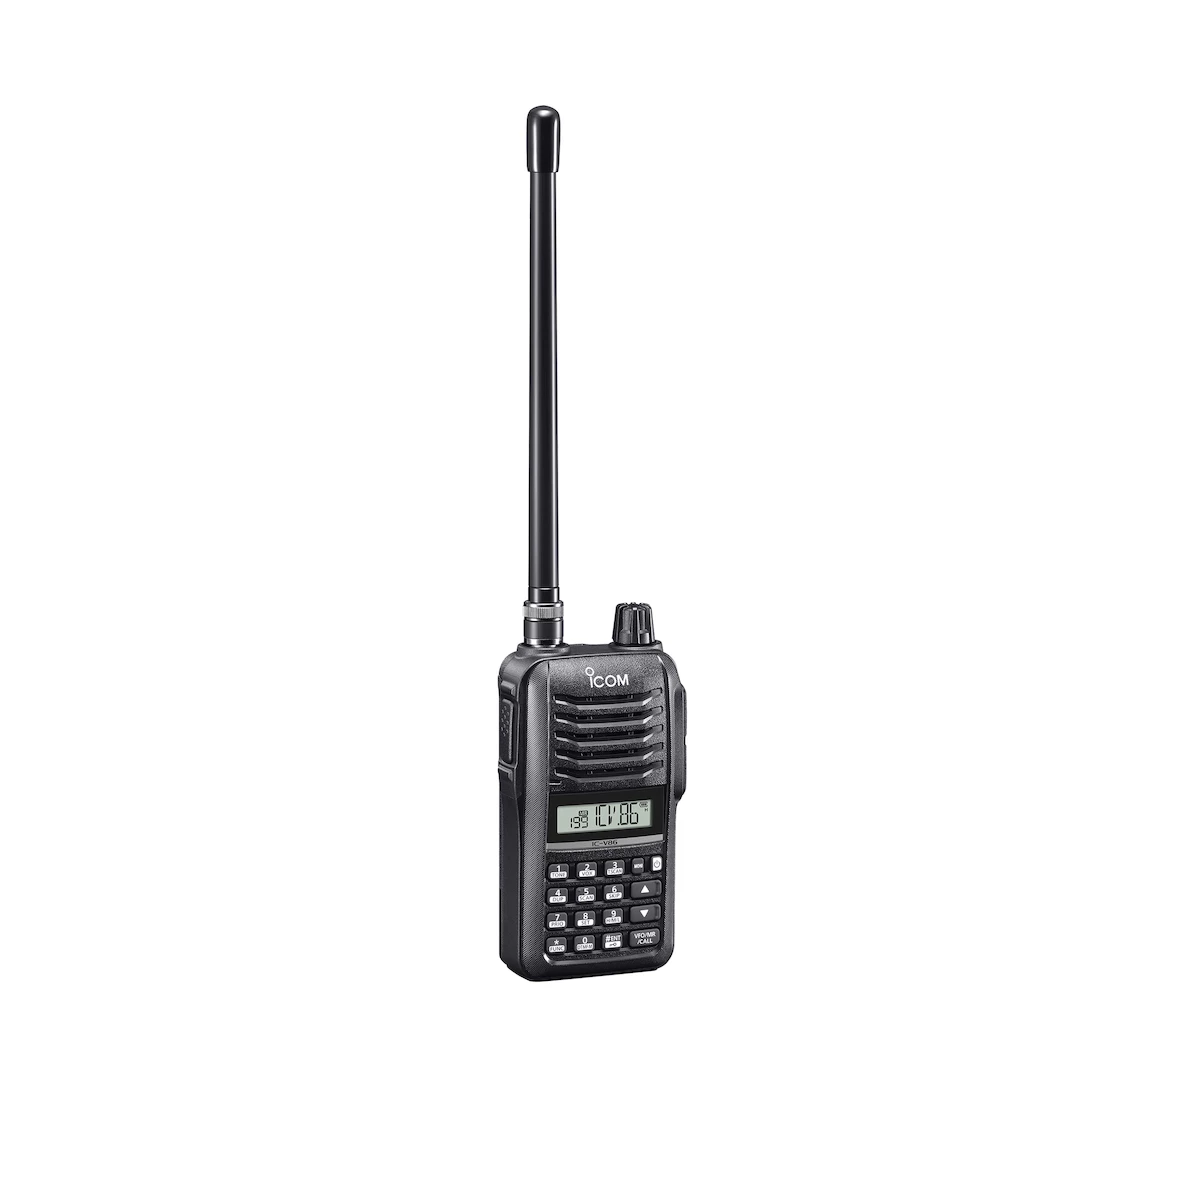 Icom IC-V86 2M VHF FM Portable with Powerful Audio - GPSCentral.ca